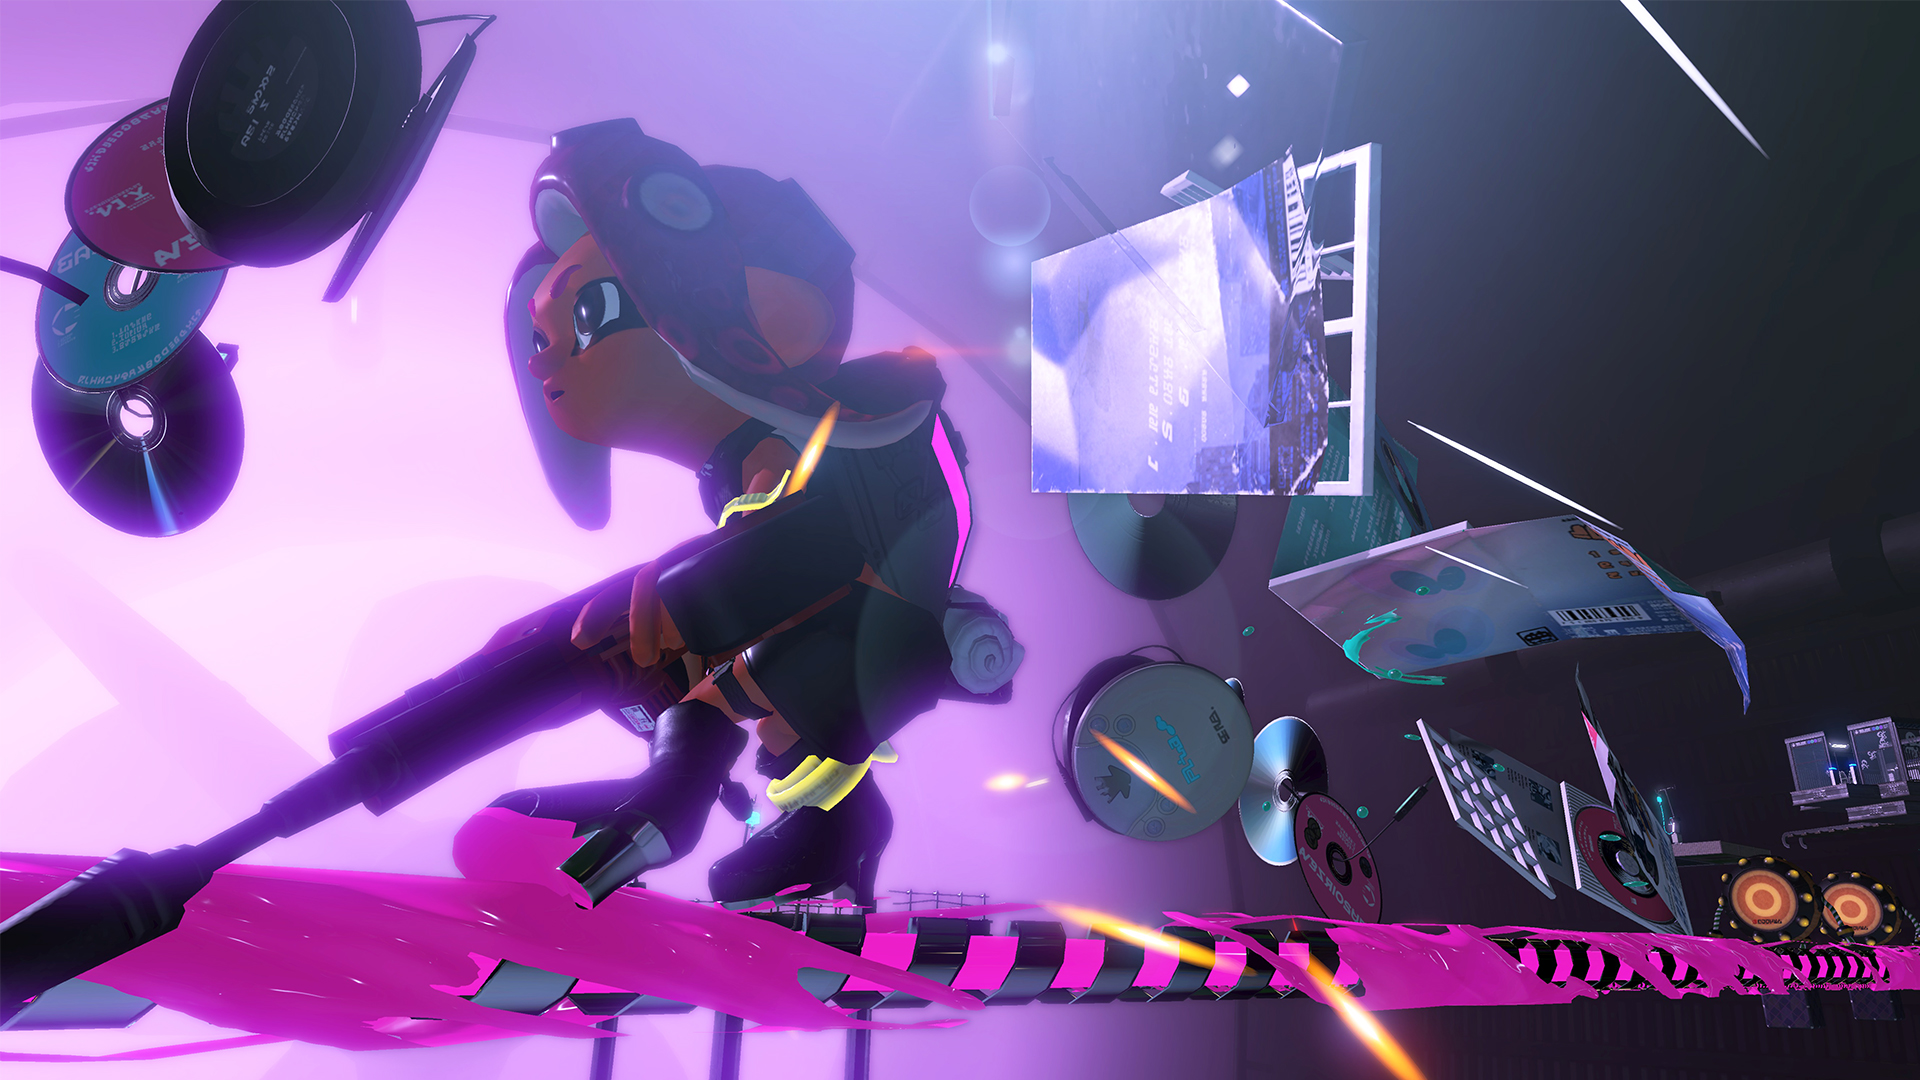 Agent8_in-game_promo_image3.jpg